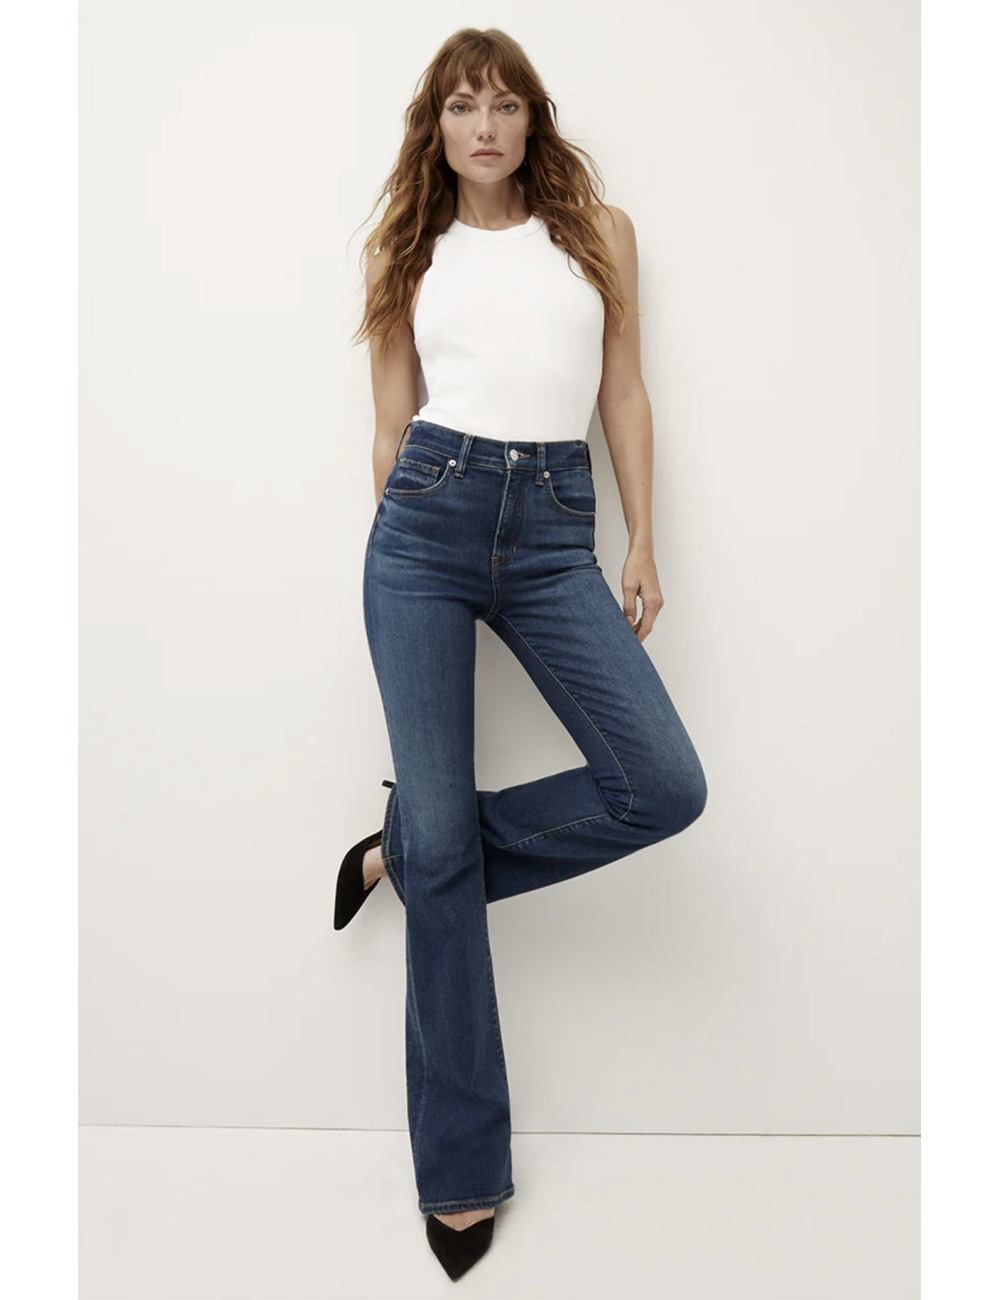 BEVERLY JEANS - 